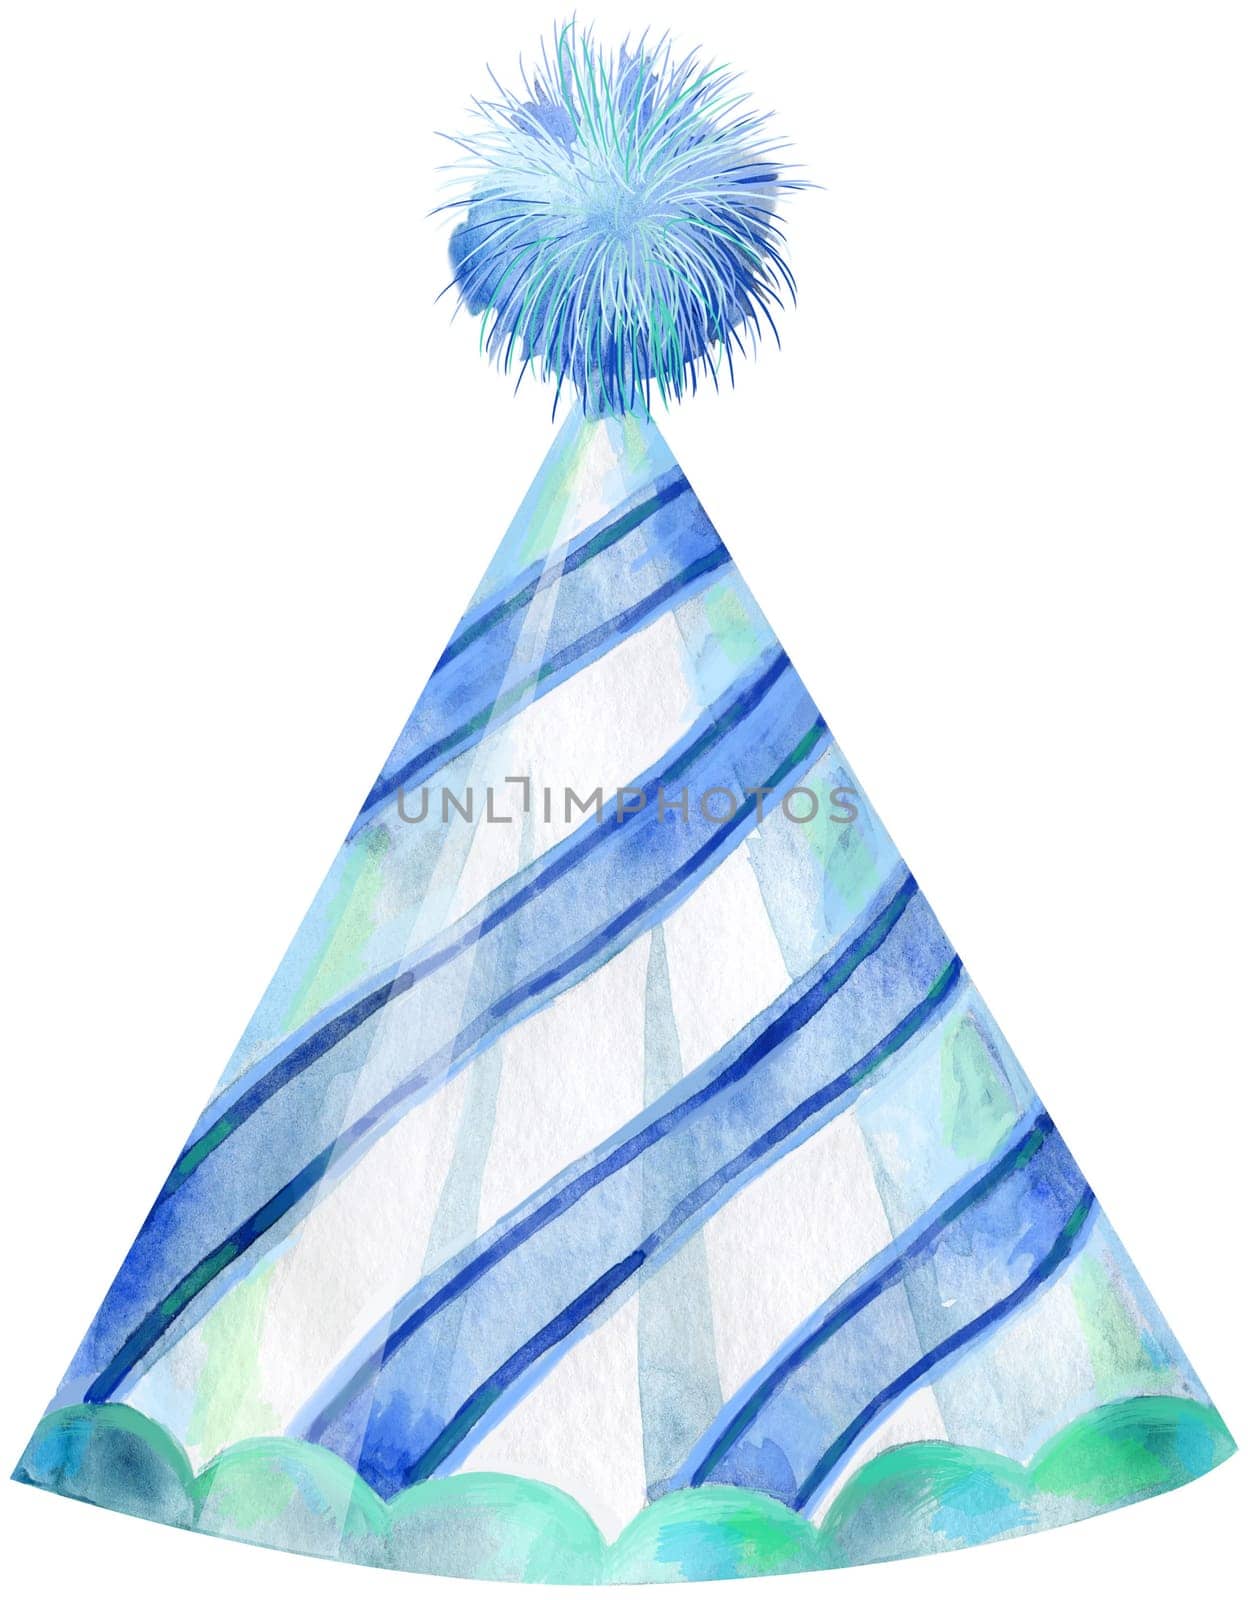 Blue party hat on light background. Card design. Watercolor hand drawing